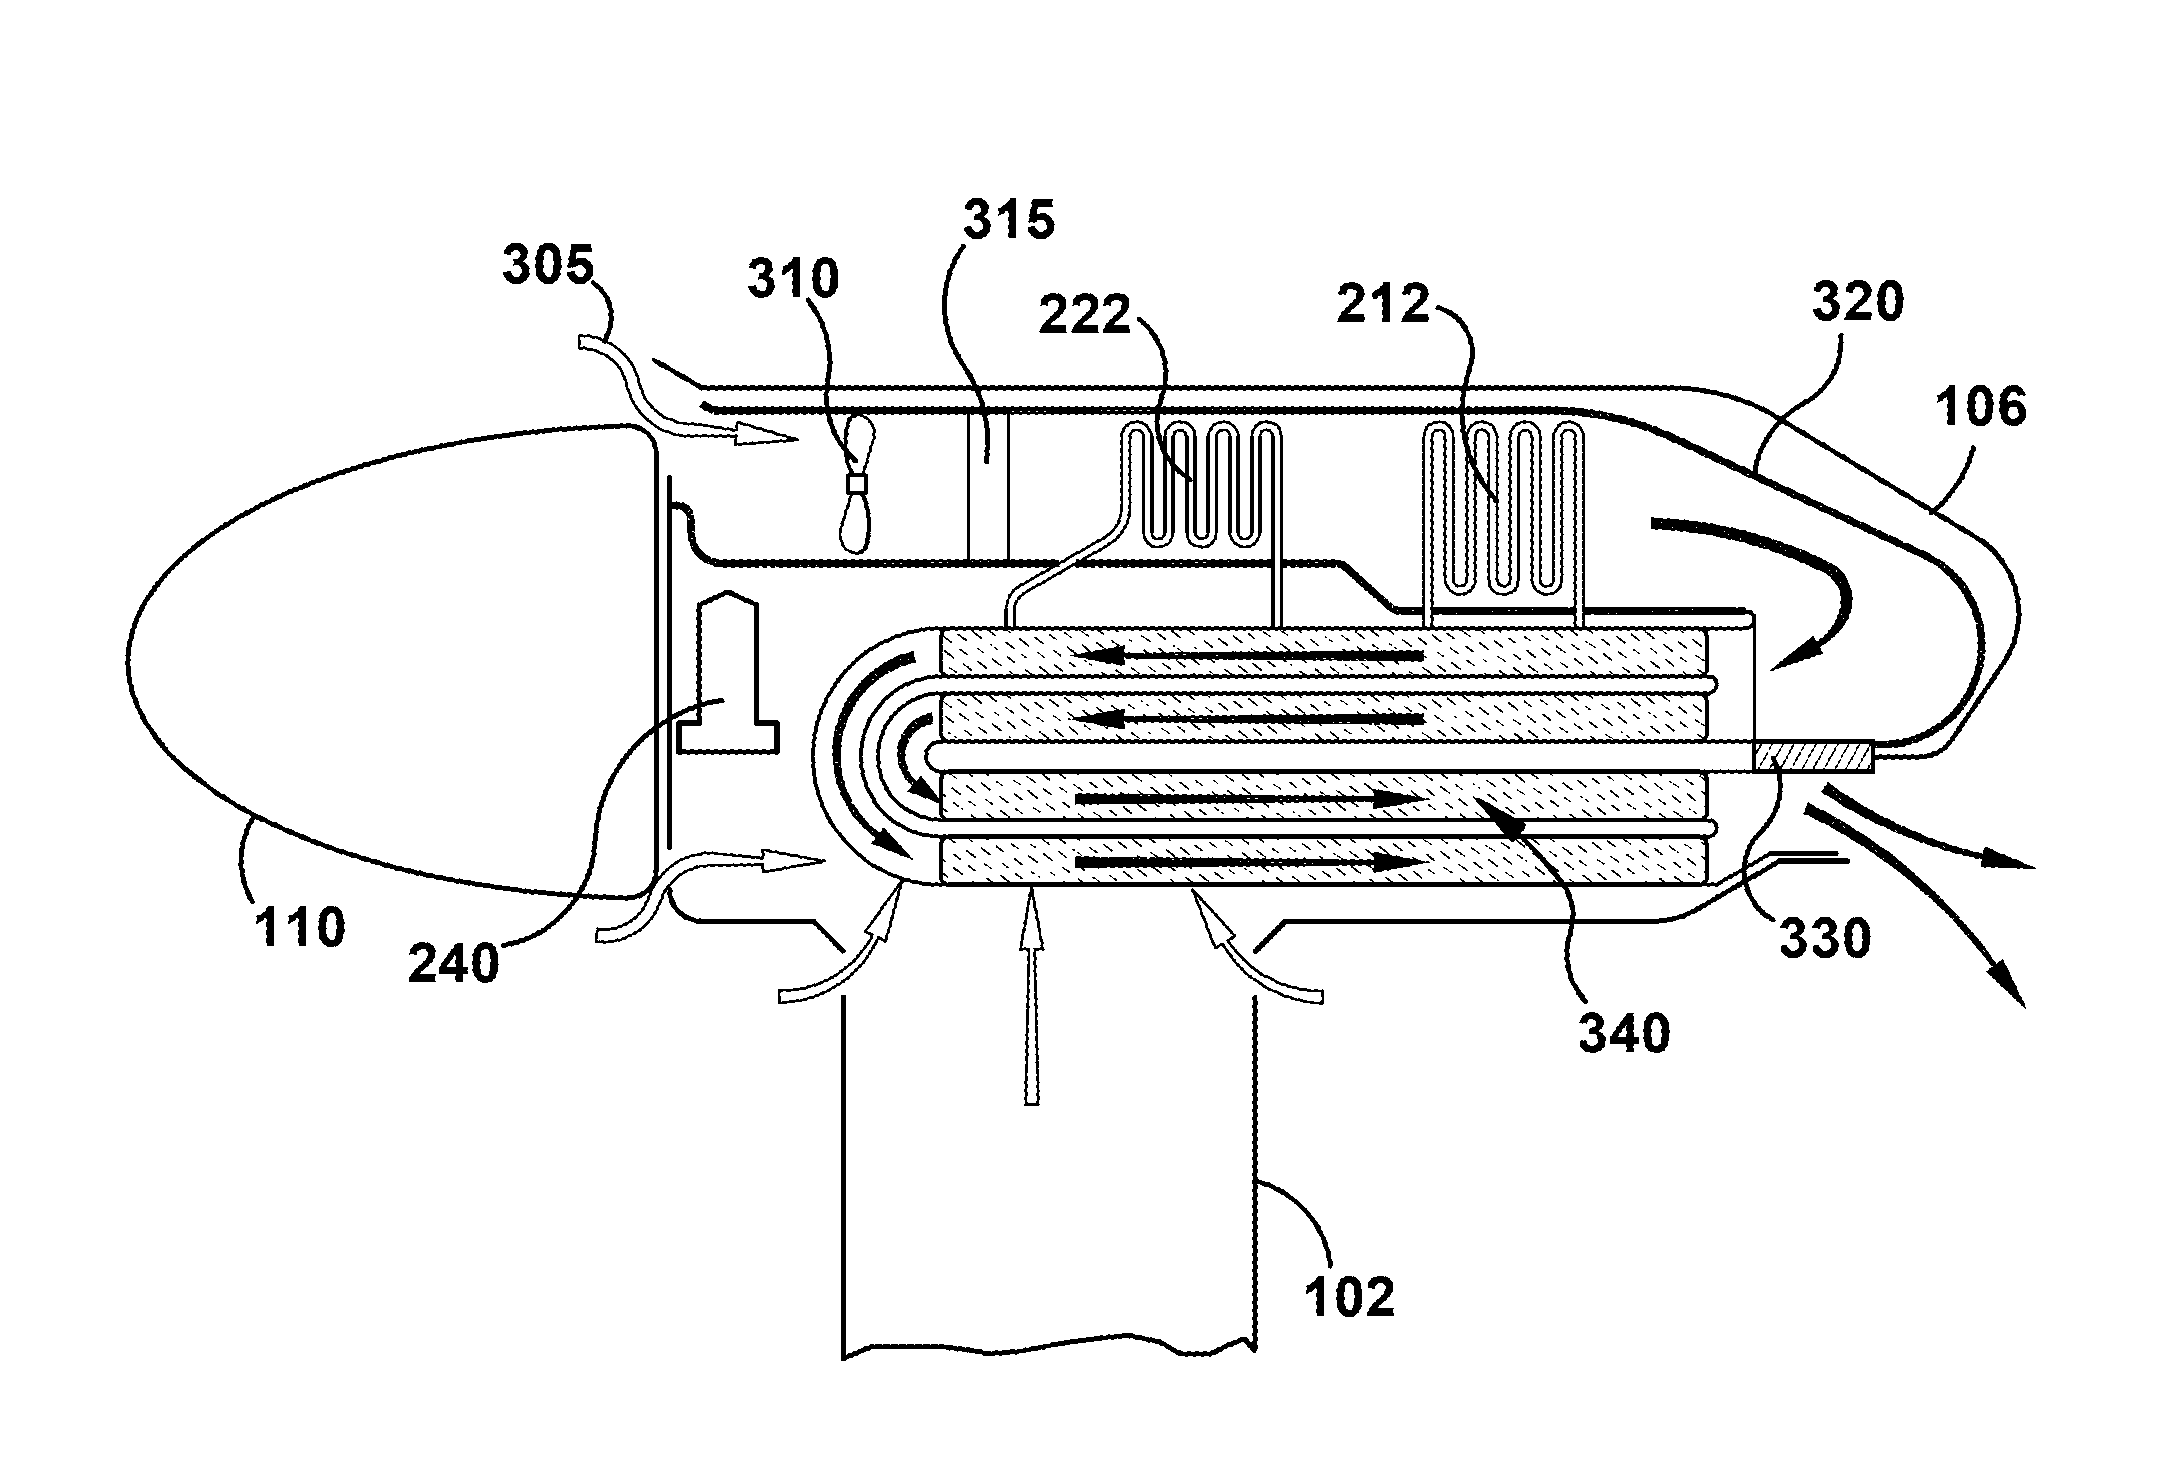 System for heating and cooling wind turbine components